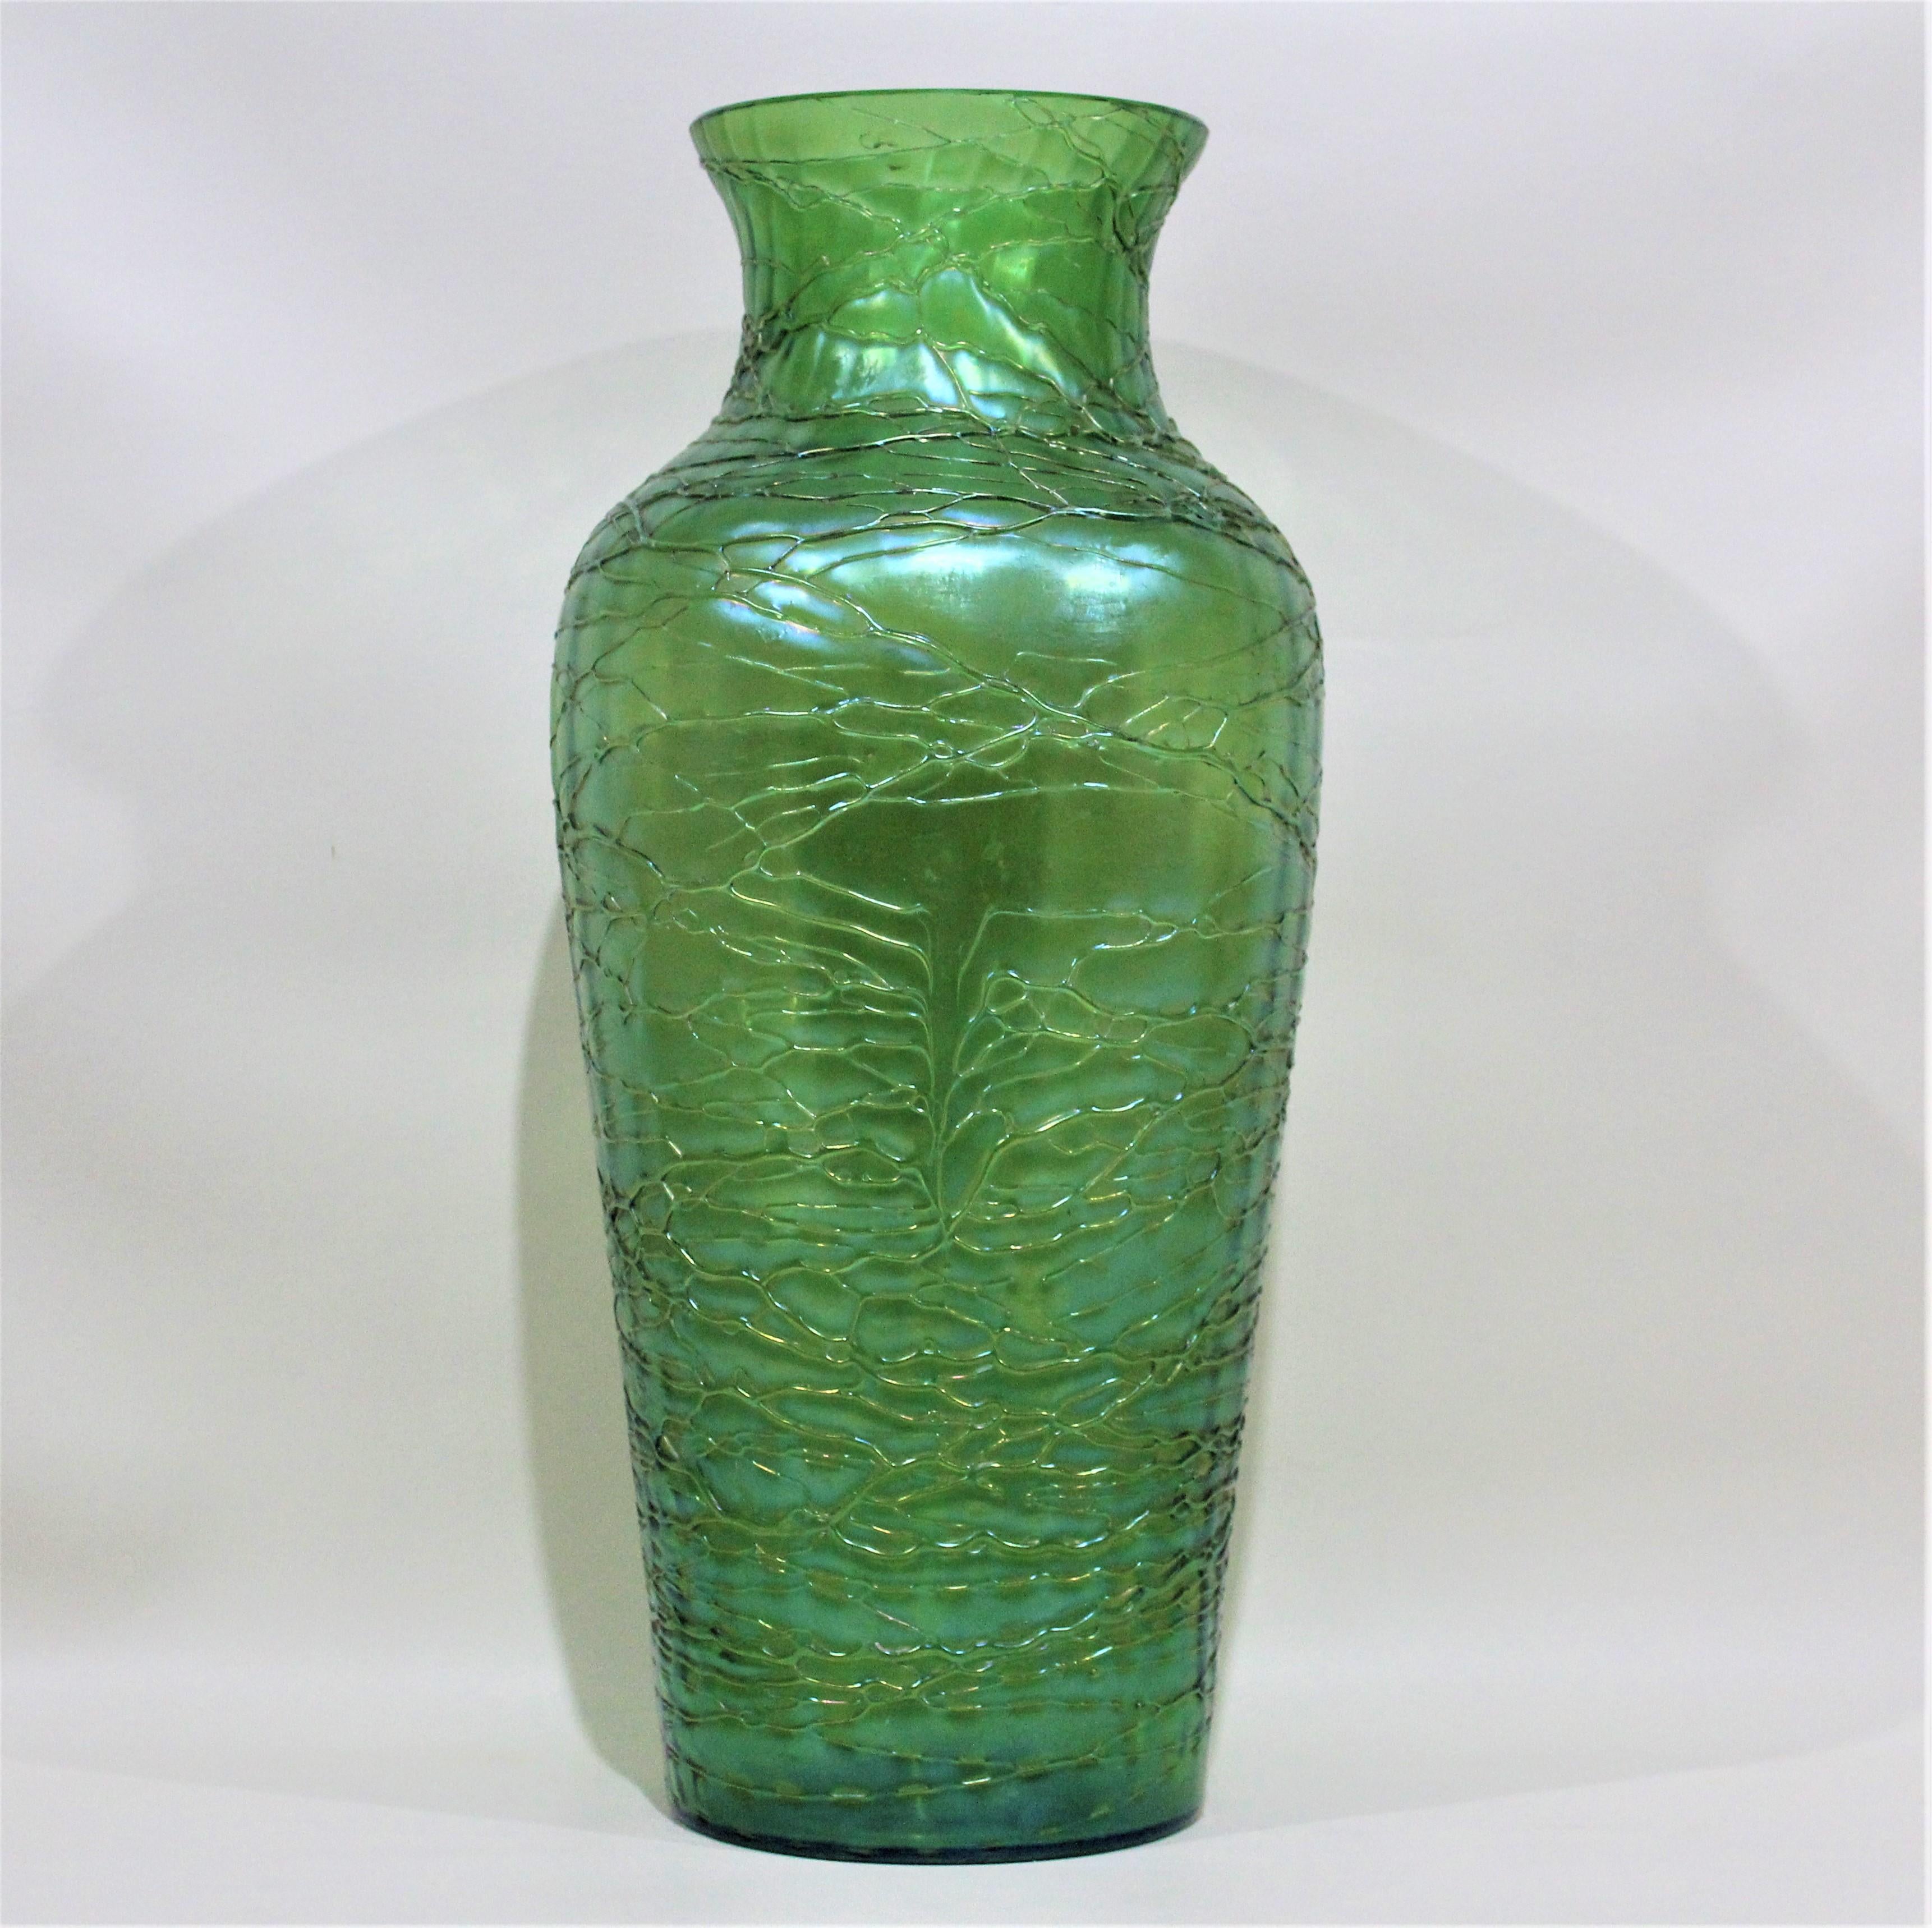 This substantial iridescent deep green vase was made by Loetz in and around the Early 20th century in an Arts & Crafts or Art Nouveau style. The entire vase is artfully decorated with hand applied threading in the same color, and accentuates the